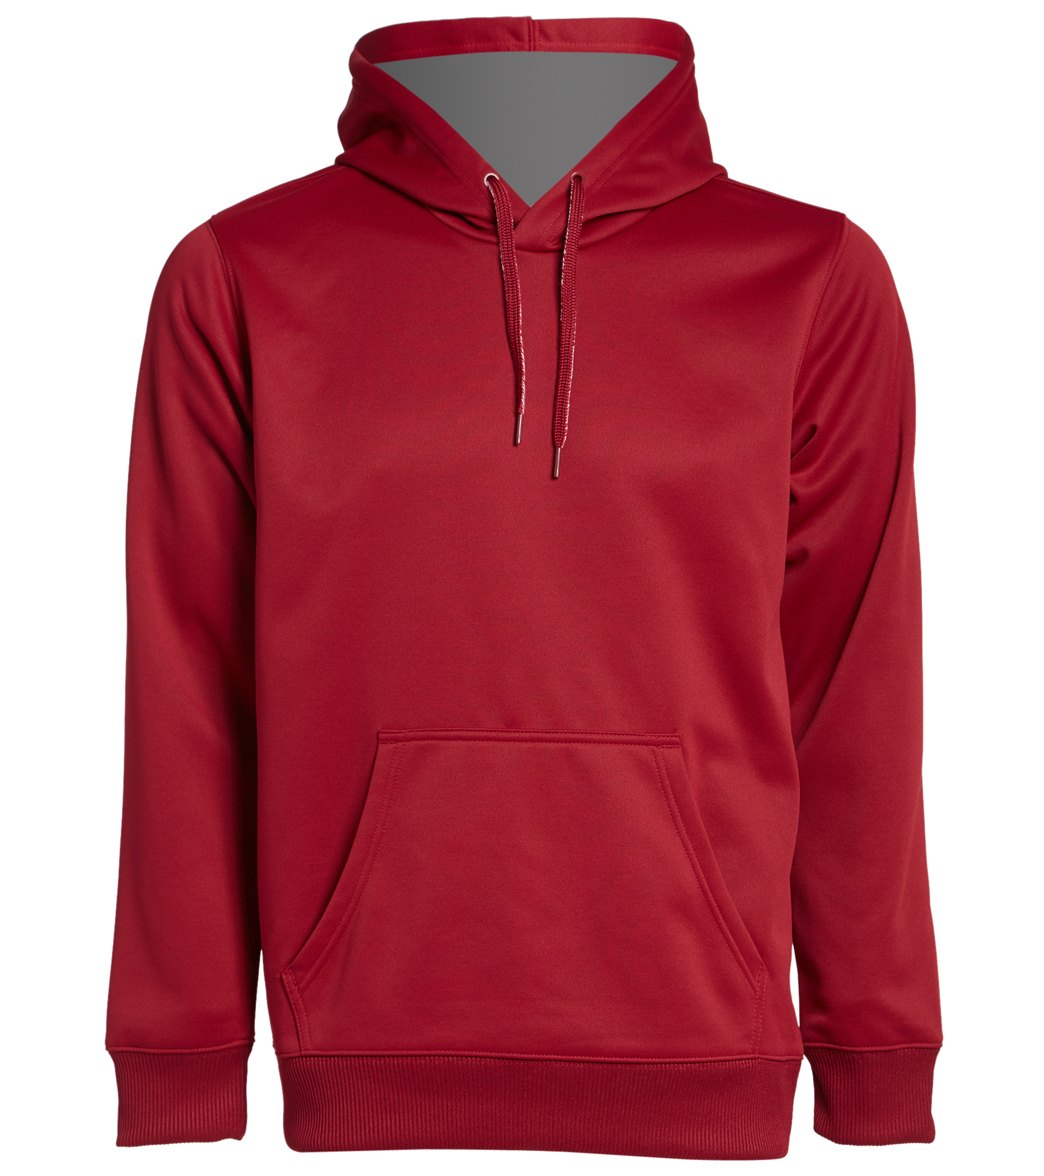 Adidas Men's Team Issue Hoodie at SwimOutlet.com - Free Shipping